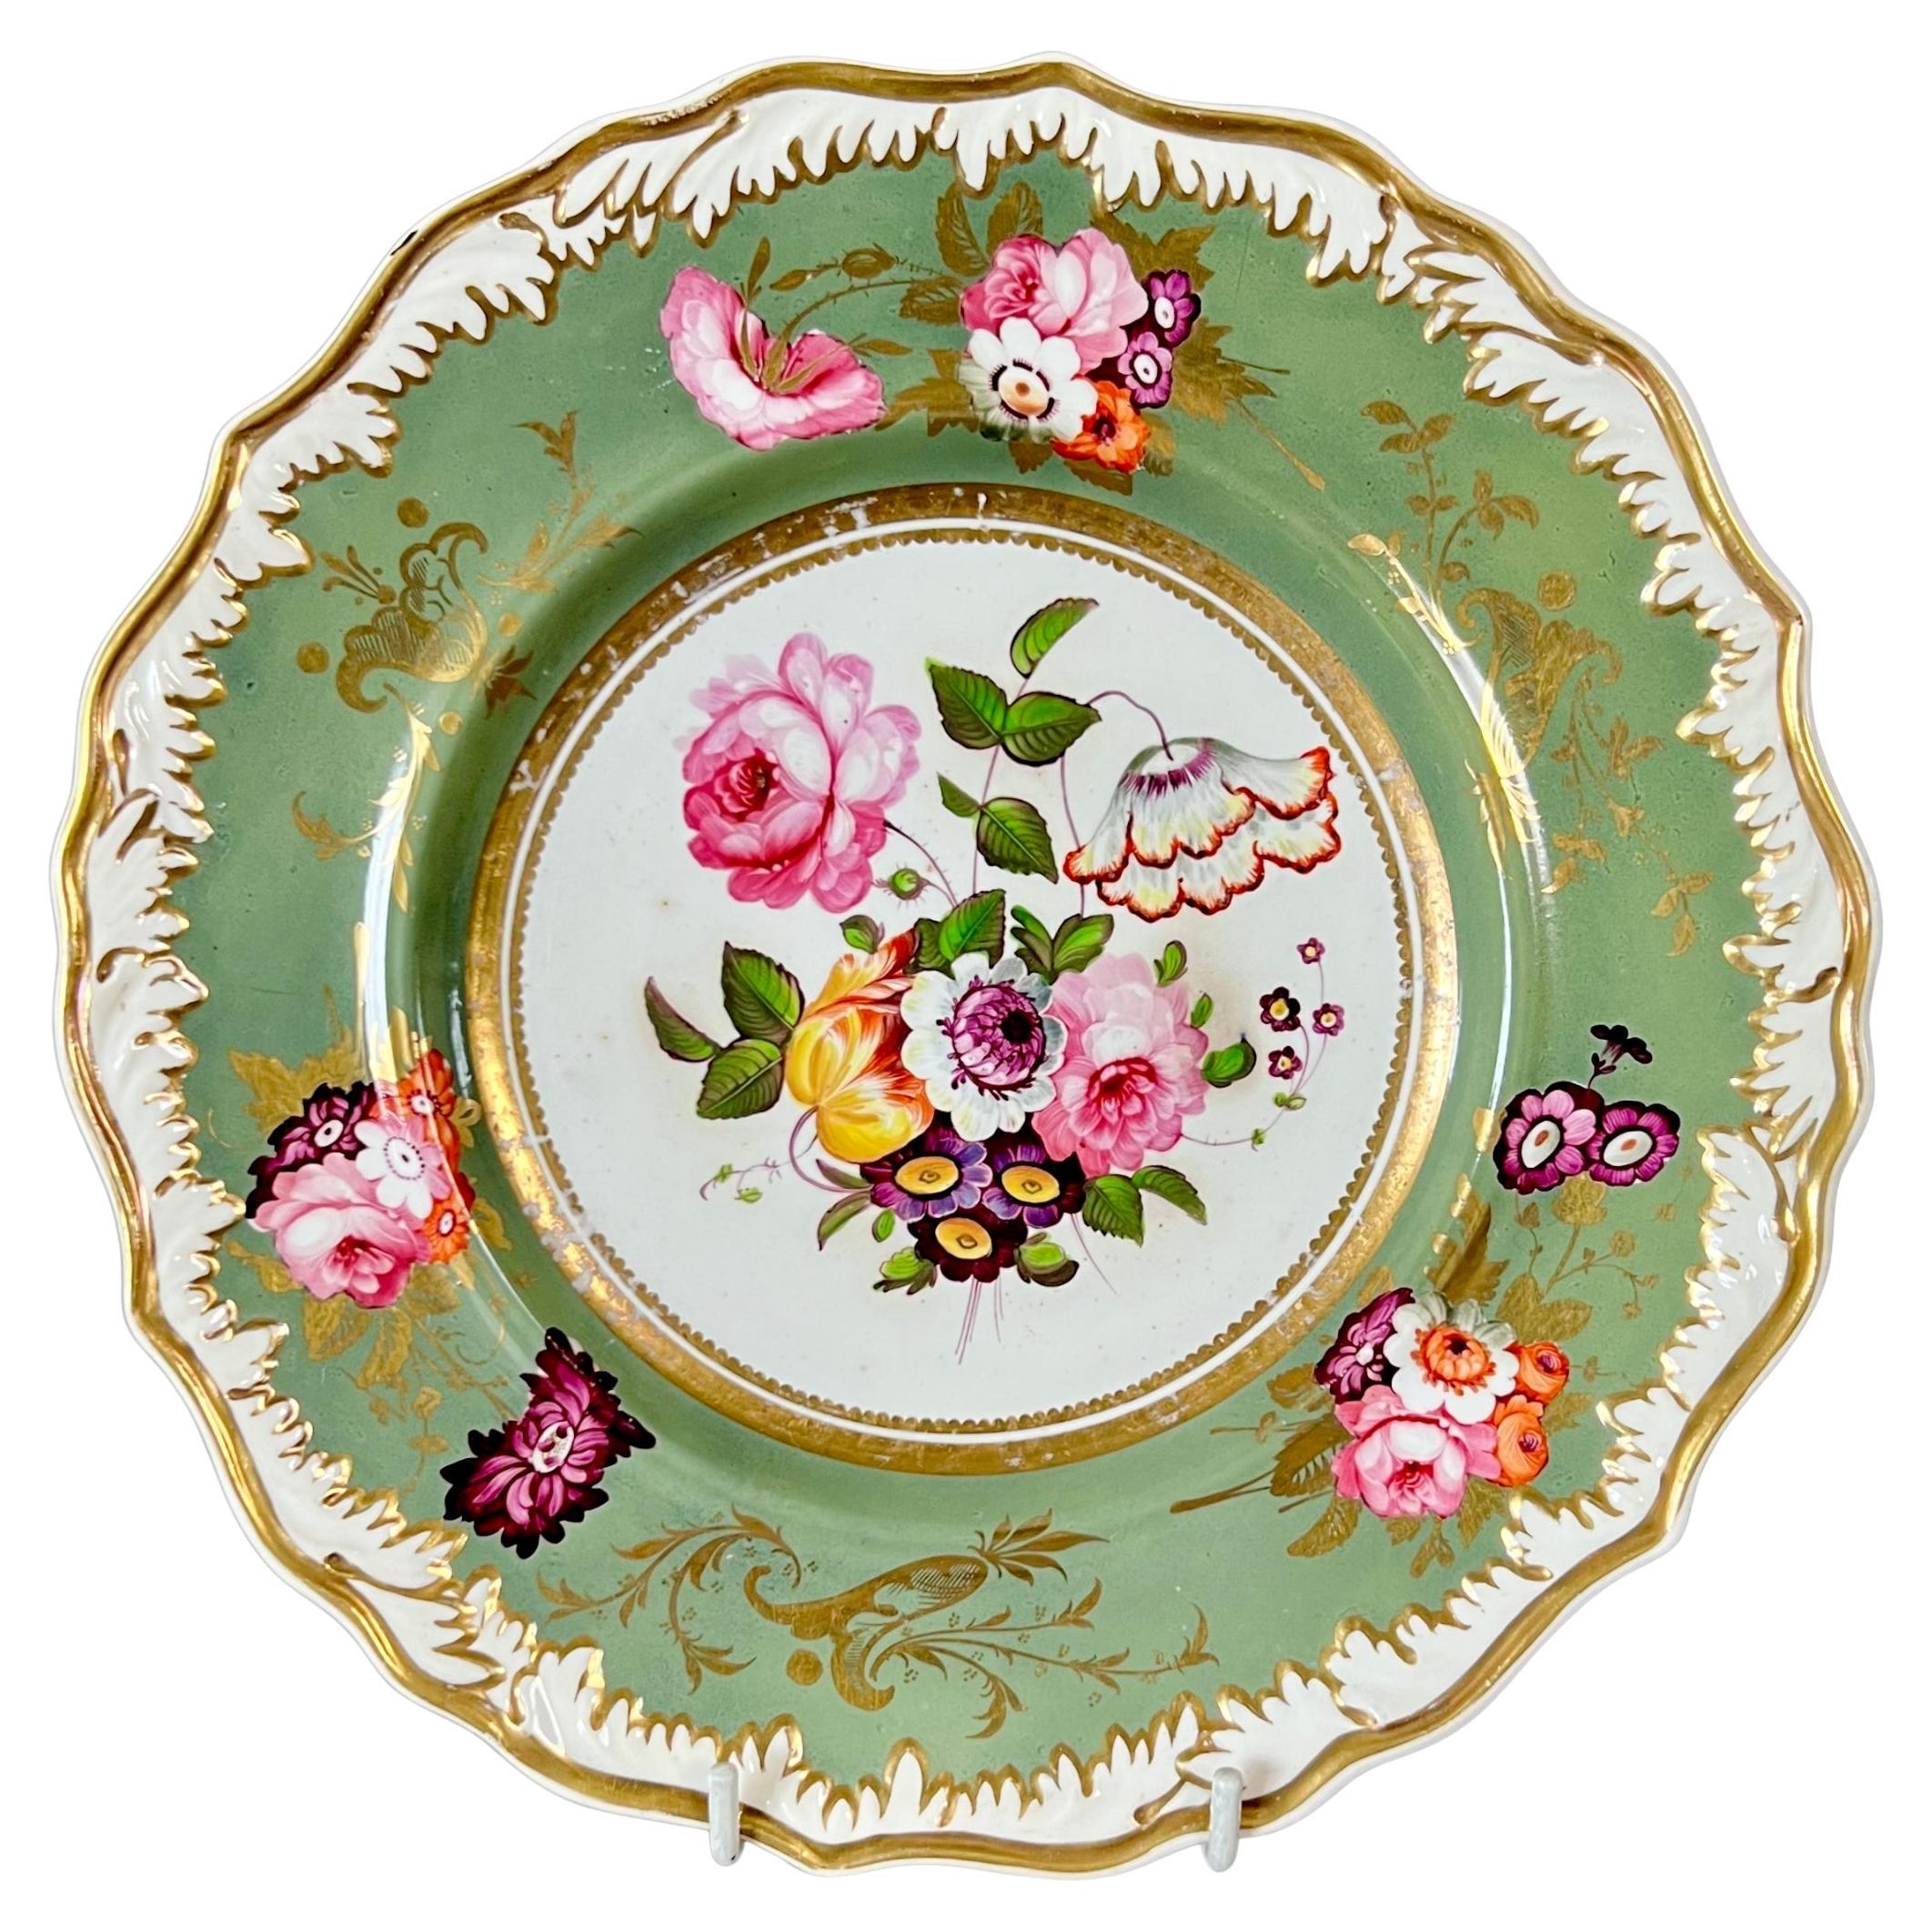 Samuel Alcock Plate, Melted Snow Border, Sepia Green with Flowers, ca 1822